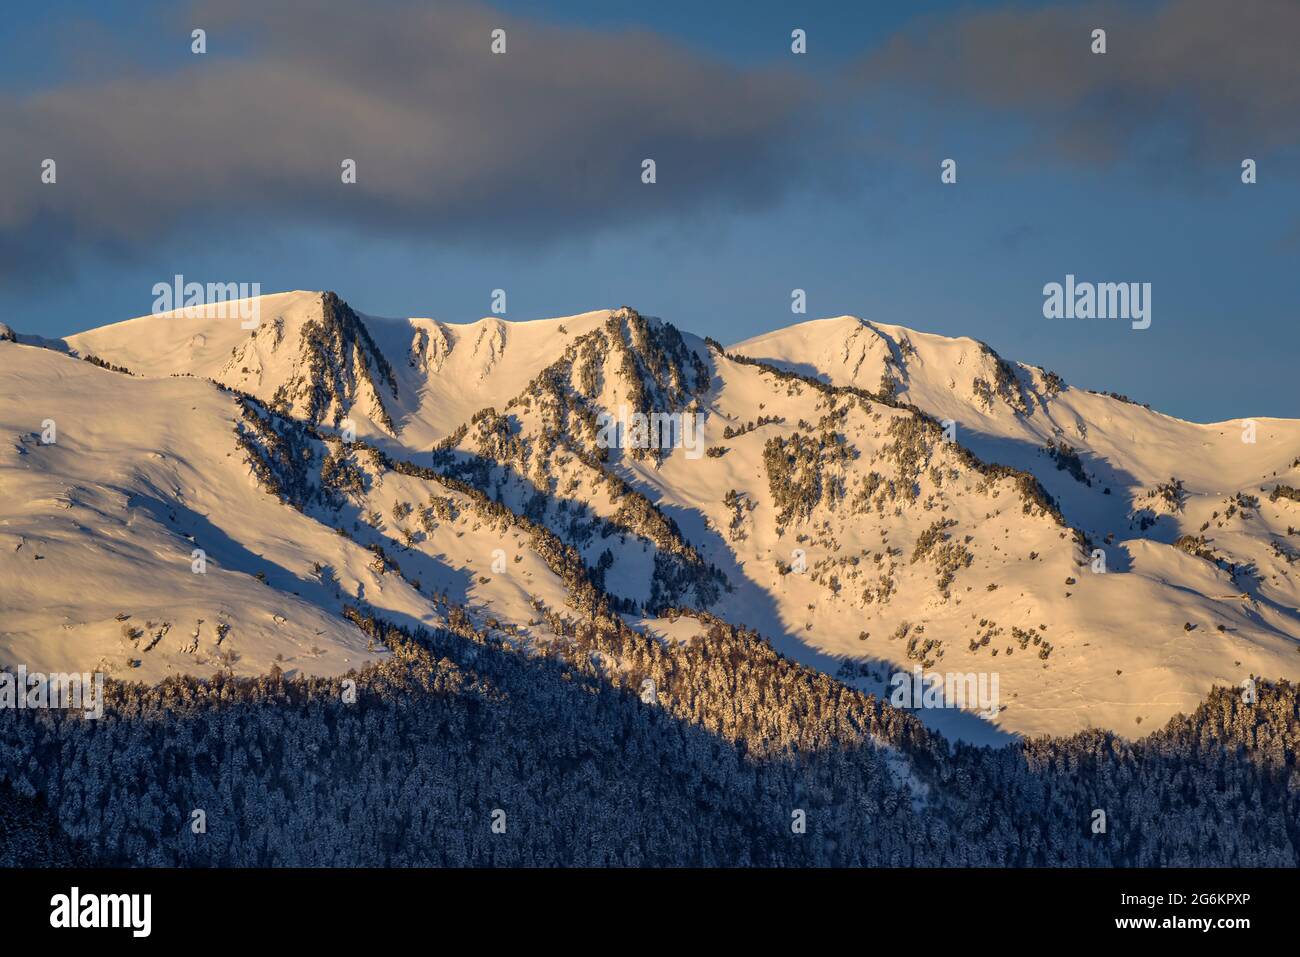 Aran Valley in a winter sunrise after a snowfall, seen from the village of Mont (Aran Valley, Catalonia, Spain, Pyrenees) Stock Photo